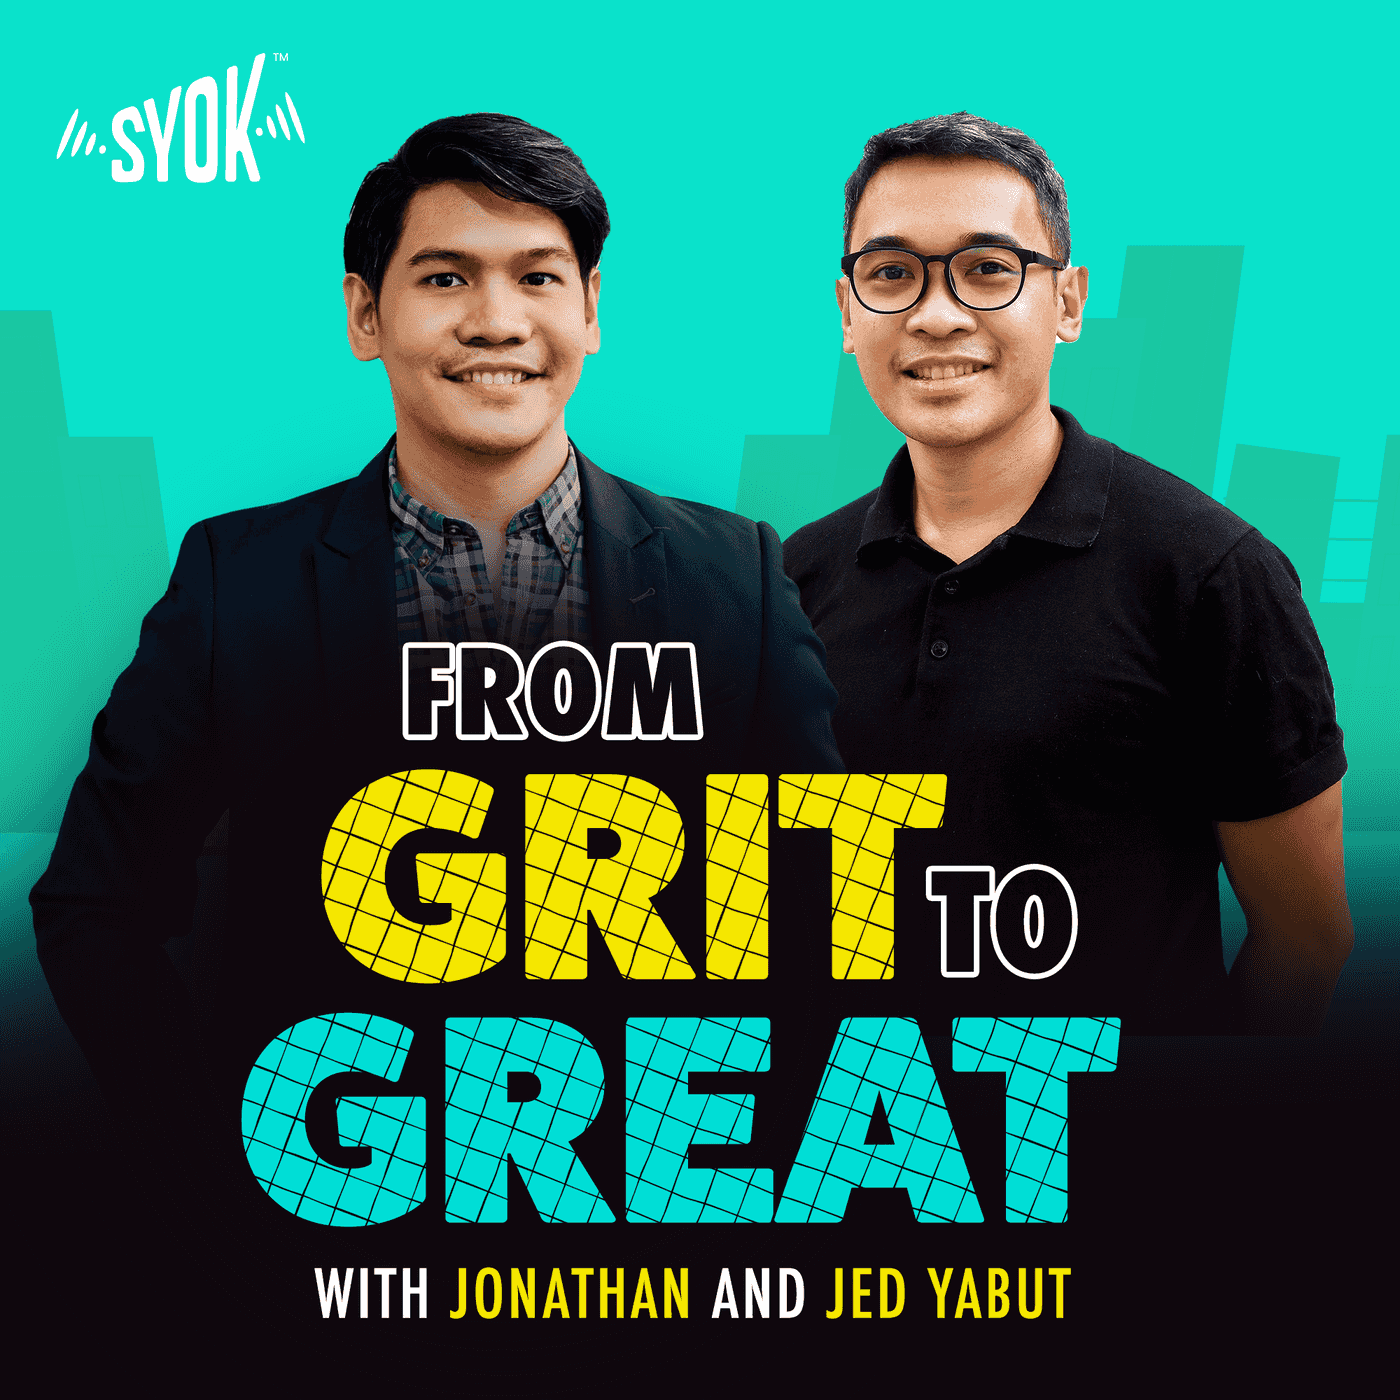 From Grit To Great with Jonathan and Jed Yabut